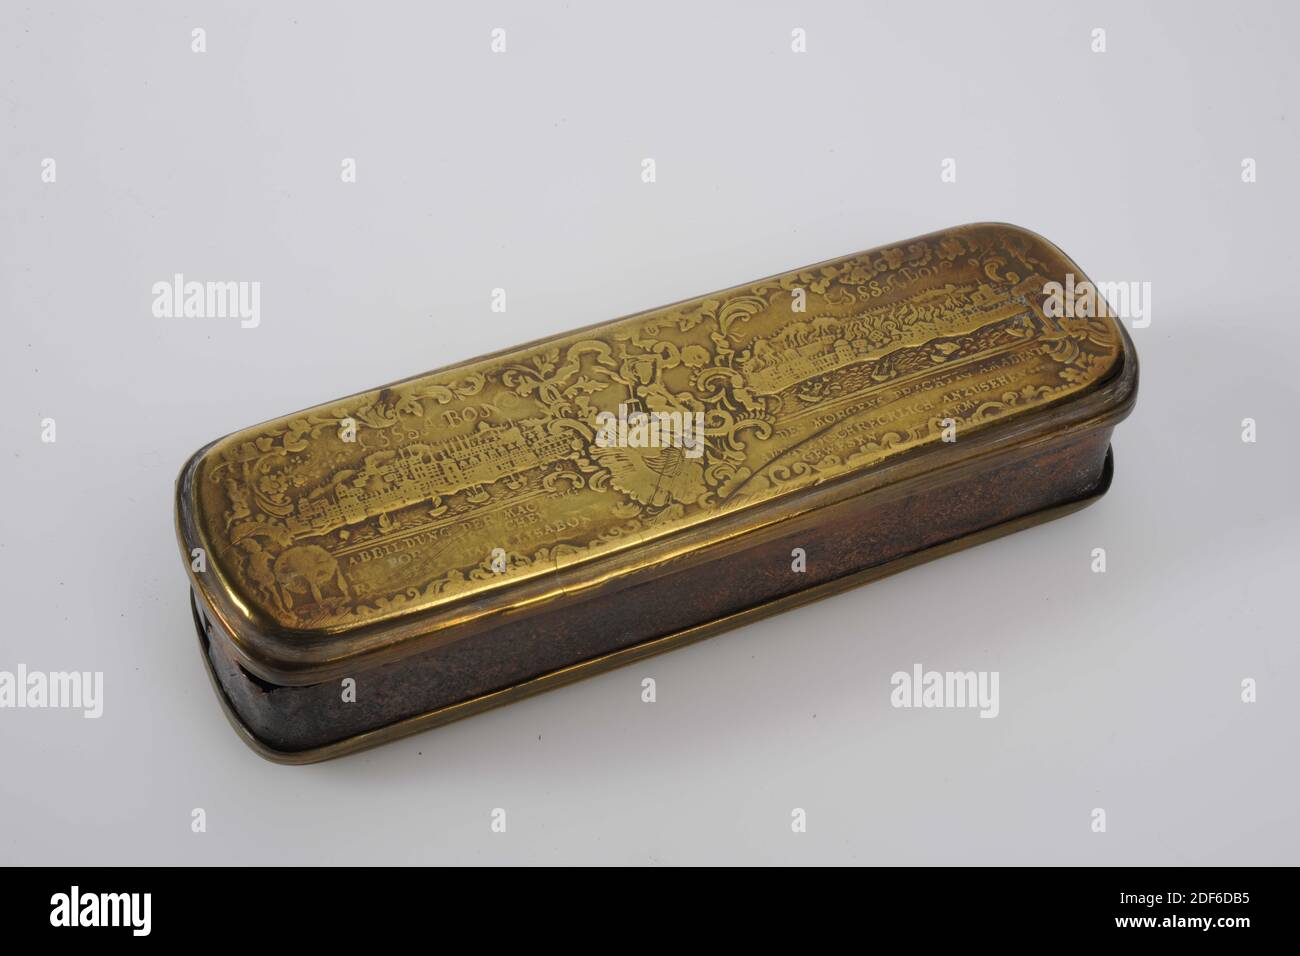 tobacco box, Anonymous, 18th century, General: 3.4 x 15.2 x 5cm (34 x 152 x 50mm), man's portrait, battle, fortress, Copper tobacco box, oblong in shape with rounded corners. The lid closes with a hinge on the long side. The lid and bottom are yellow in color. The side wall at the front is red in color. The back gray. On the top a bust of Frederick of Prussia in medallion with the edge lettering: FREDERICUS BORUSSORUM REX. On the left the fortress Königstein, on the right a battle. Below: THOSE CAUGHT AUSSIG UND LOBSCHITZ DIE BATAILLE VORGE ... AND A.D.K.M. 1756. Bottom: In the middle Poseidon Stock Photo